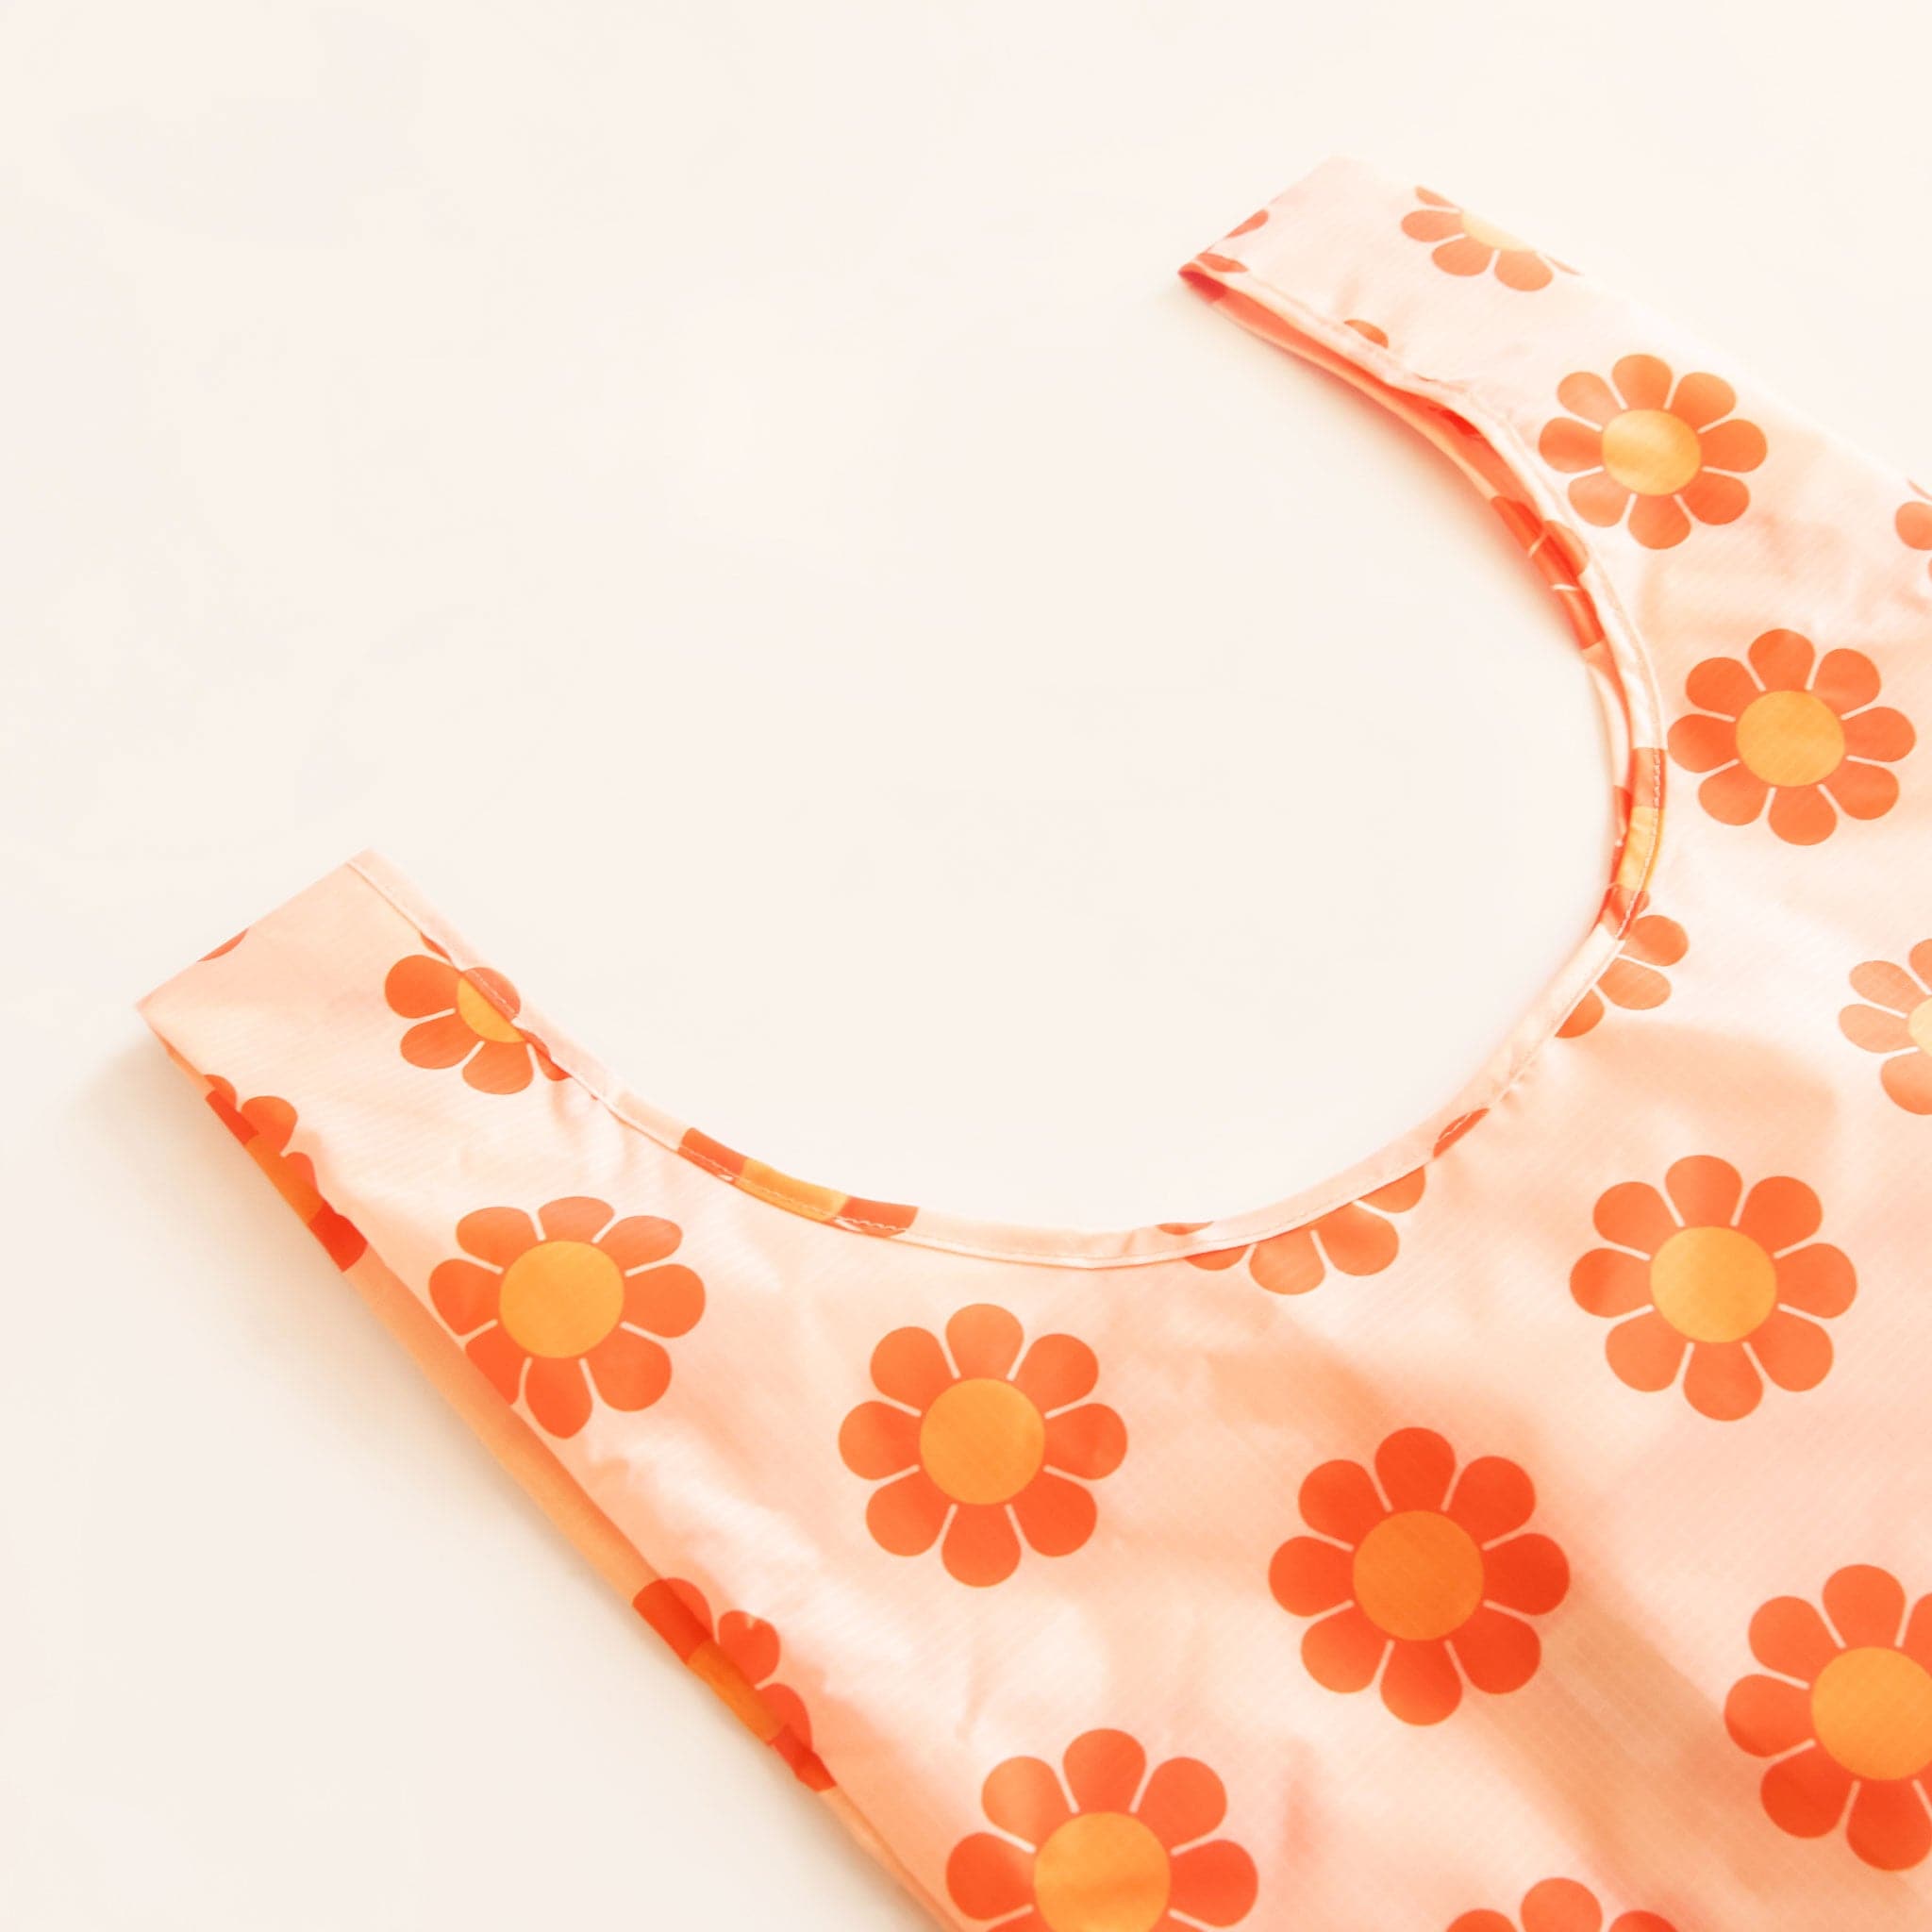 Peach reusable bag filled with a pattern of flowers with red-orange petals and tangerine centers. The bag is positioned flat on a table and has a &#39;U&#39; shape between two handles. 